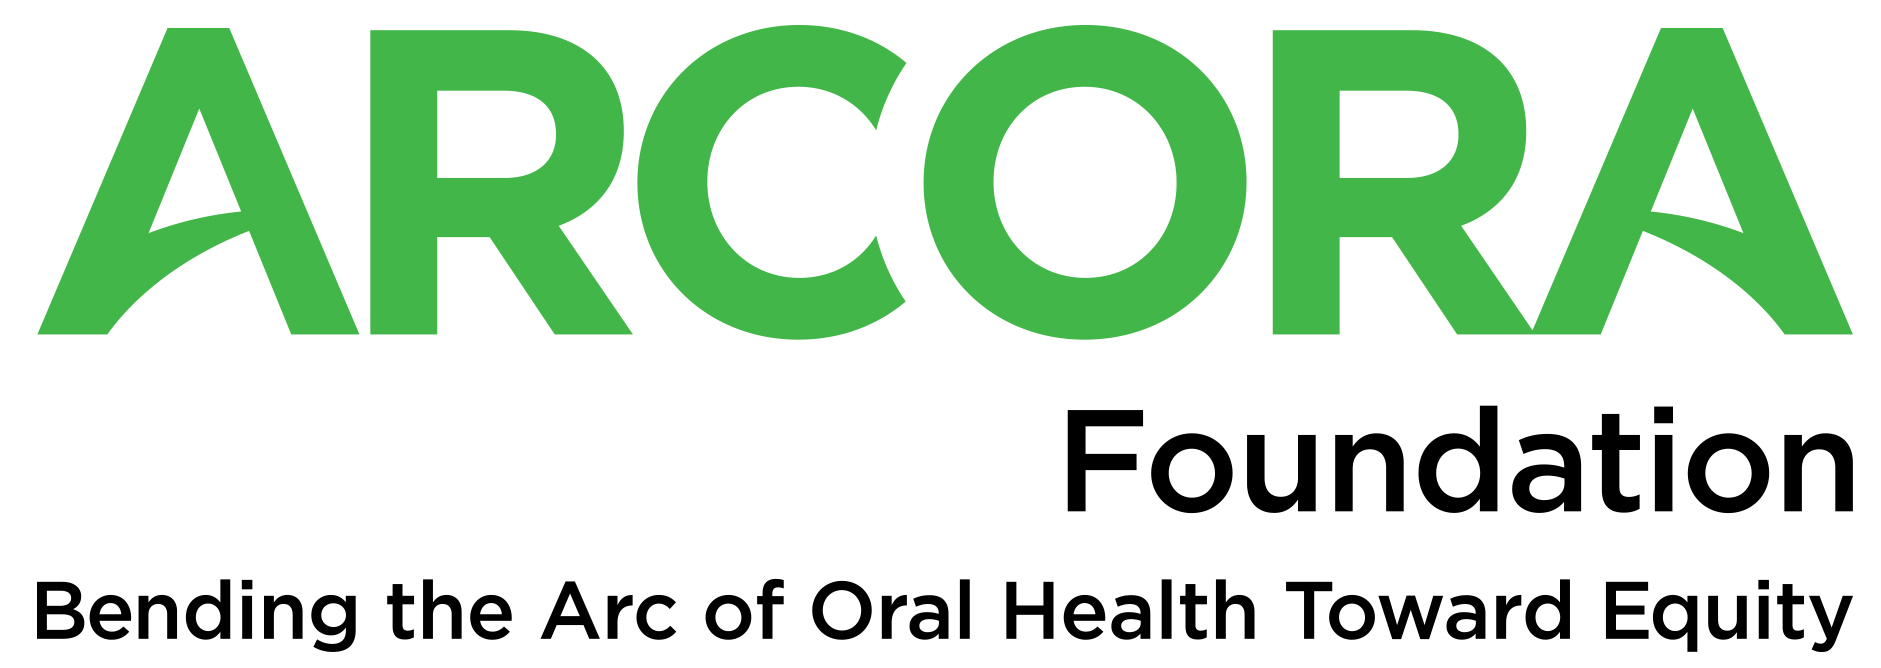 Arcora Foundation logo "Bending the Arc of Oral Health Toward Equity"